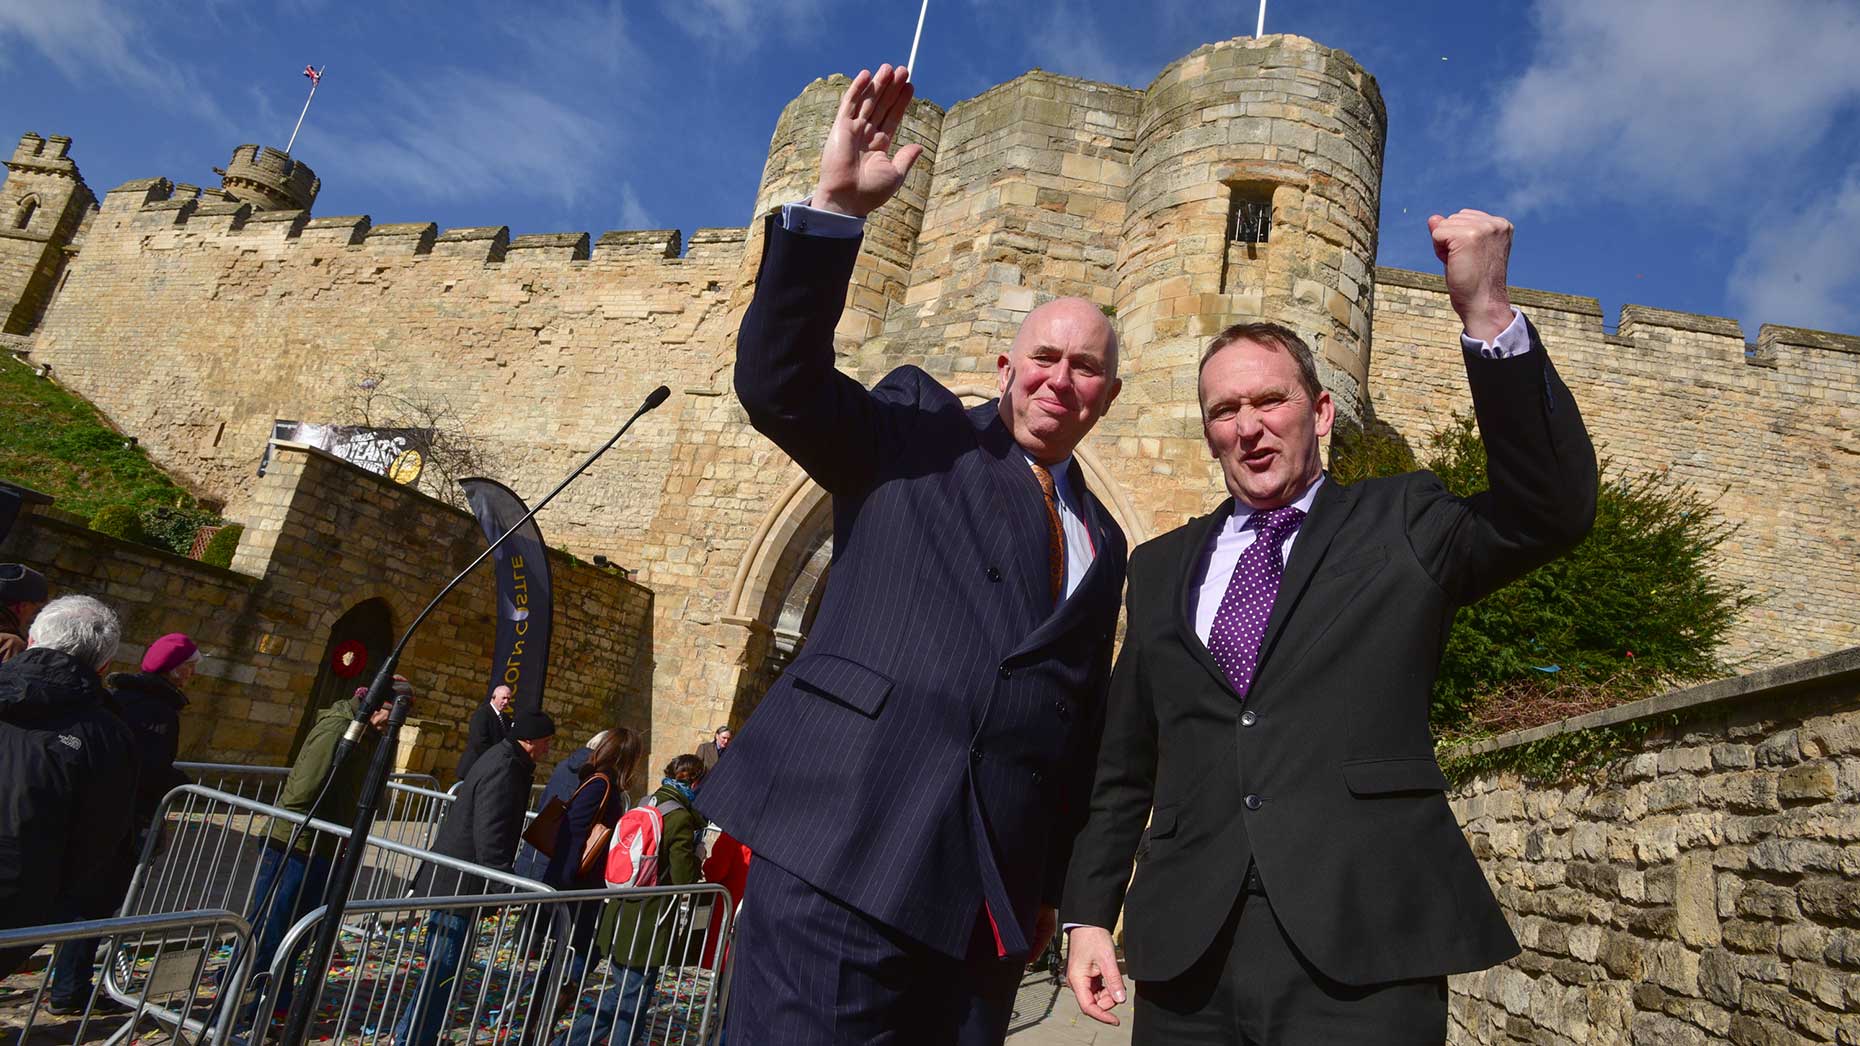 Councillor Colin Davie and Councillor Nick Worth celebrating the opening day of Lincoln Castle after a £22 million revamp. Photo: Steve Smailes for The Lincolnite